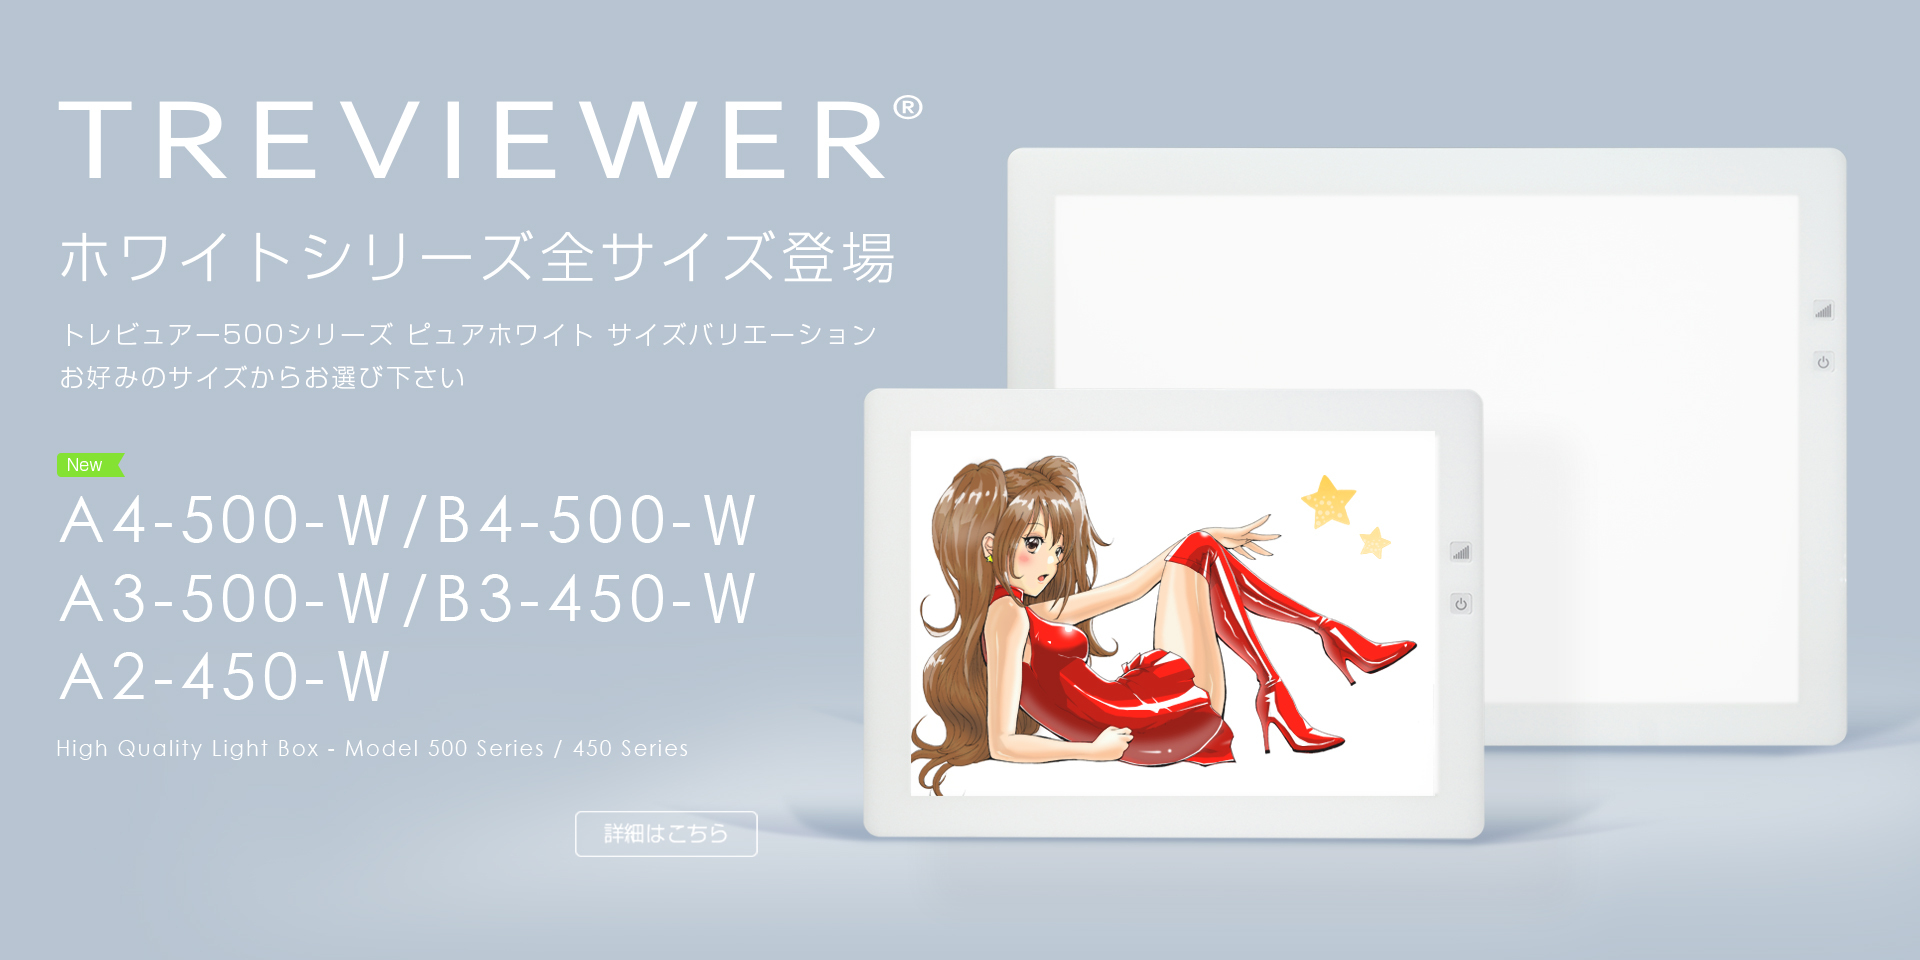 TREVIEWER A3-500-W 2019年版